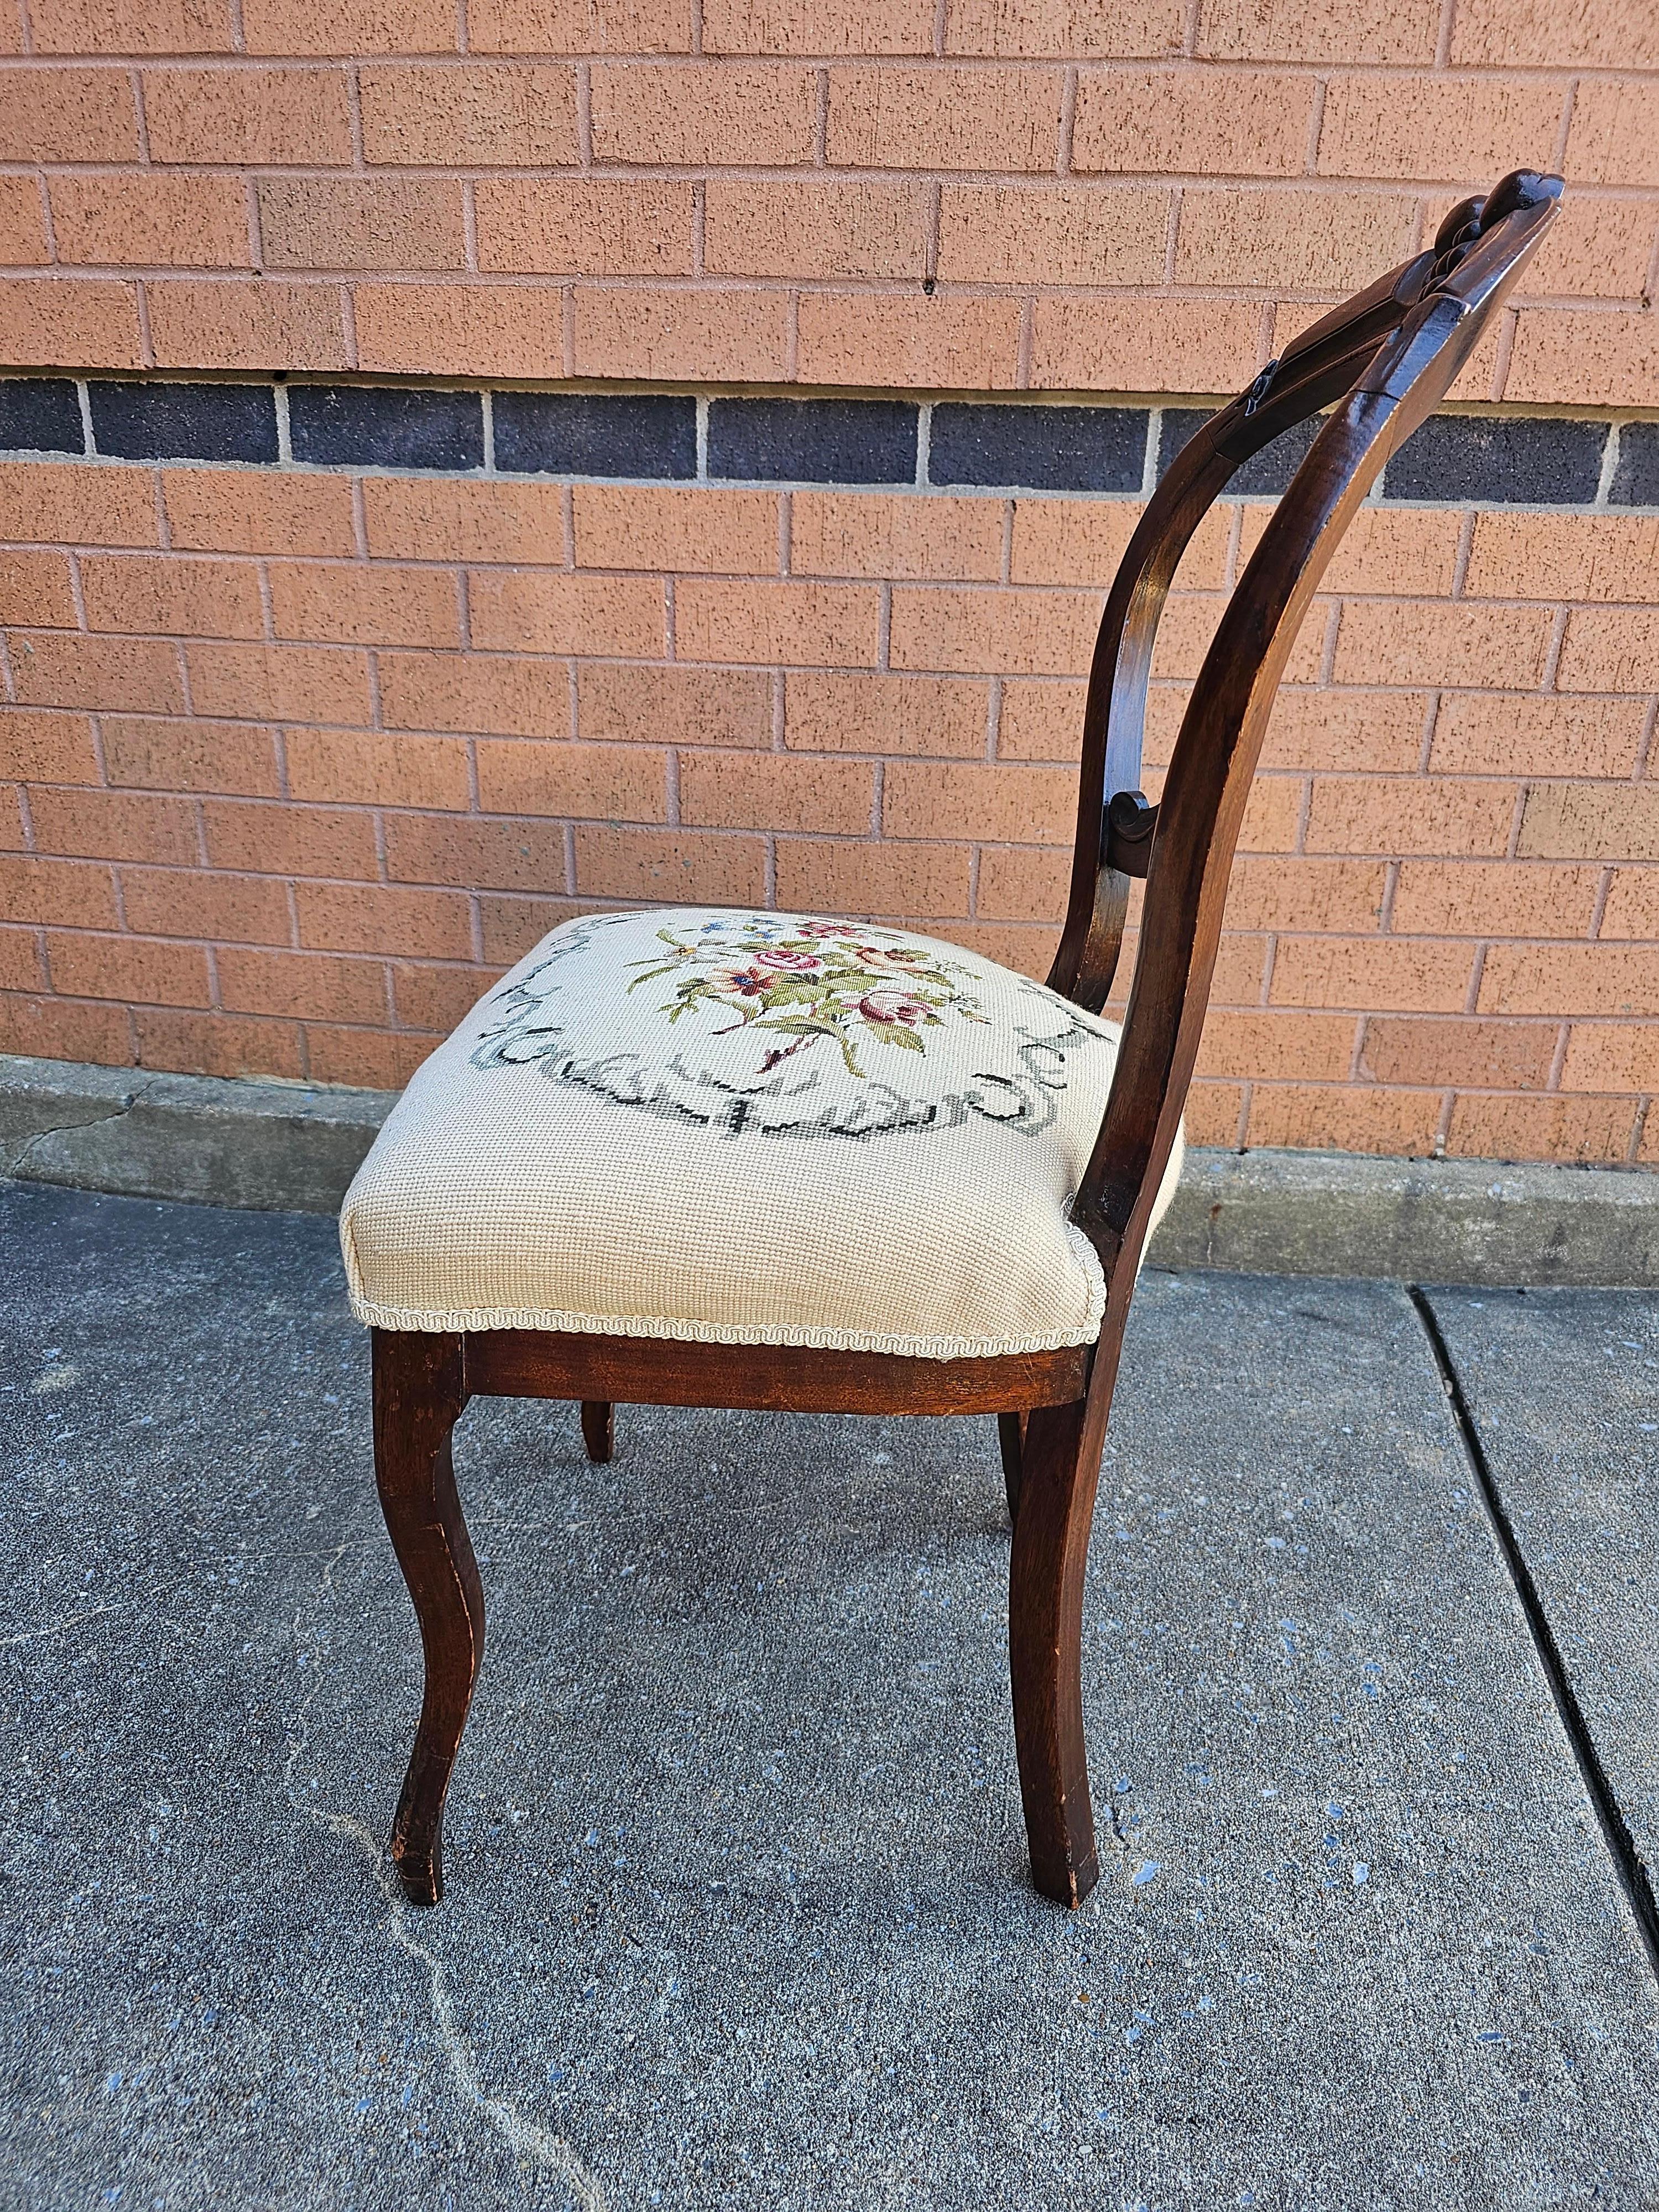 20th Century Victorian Walnut Needlepoint Upholstered Side Chair